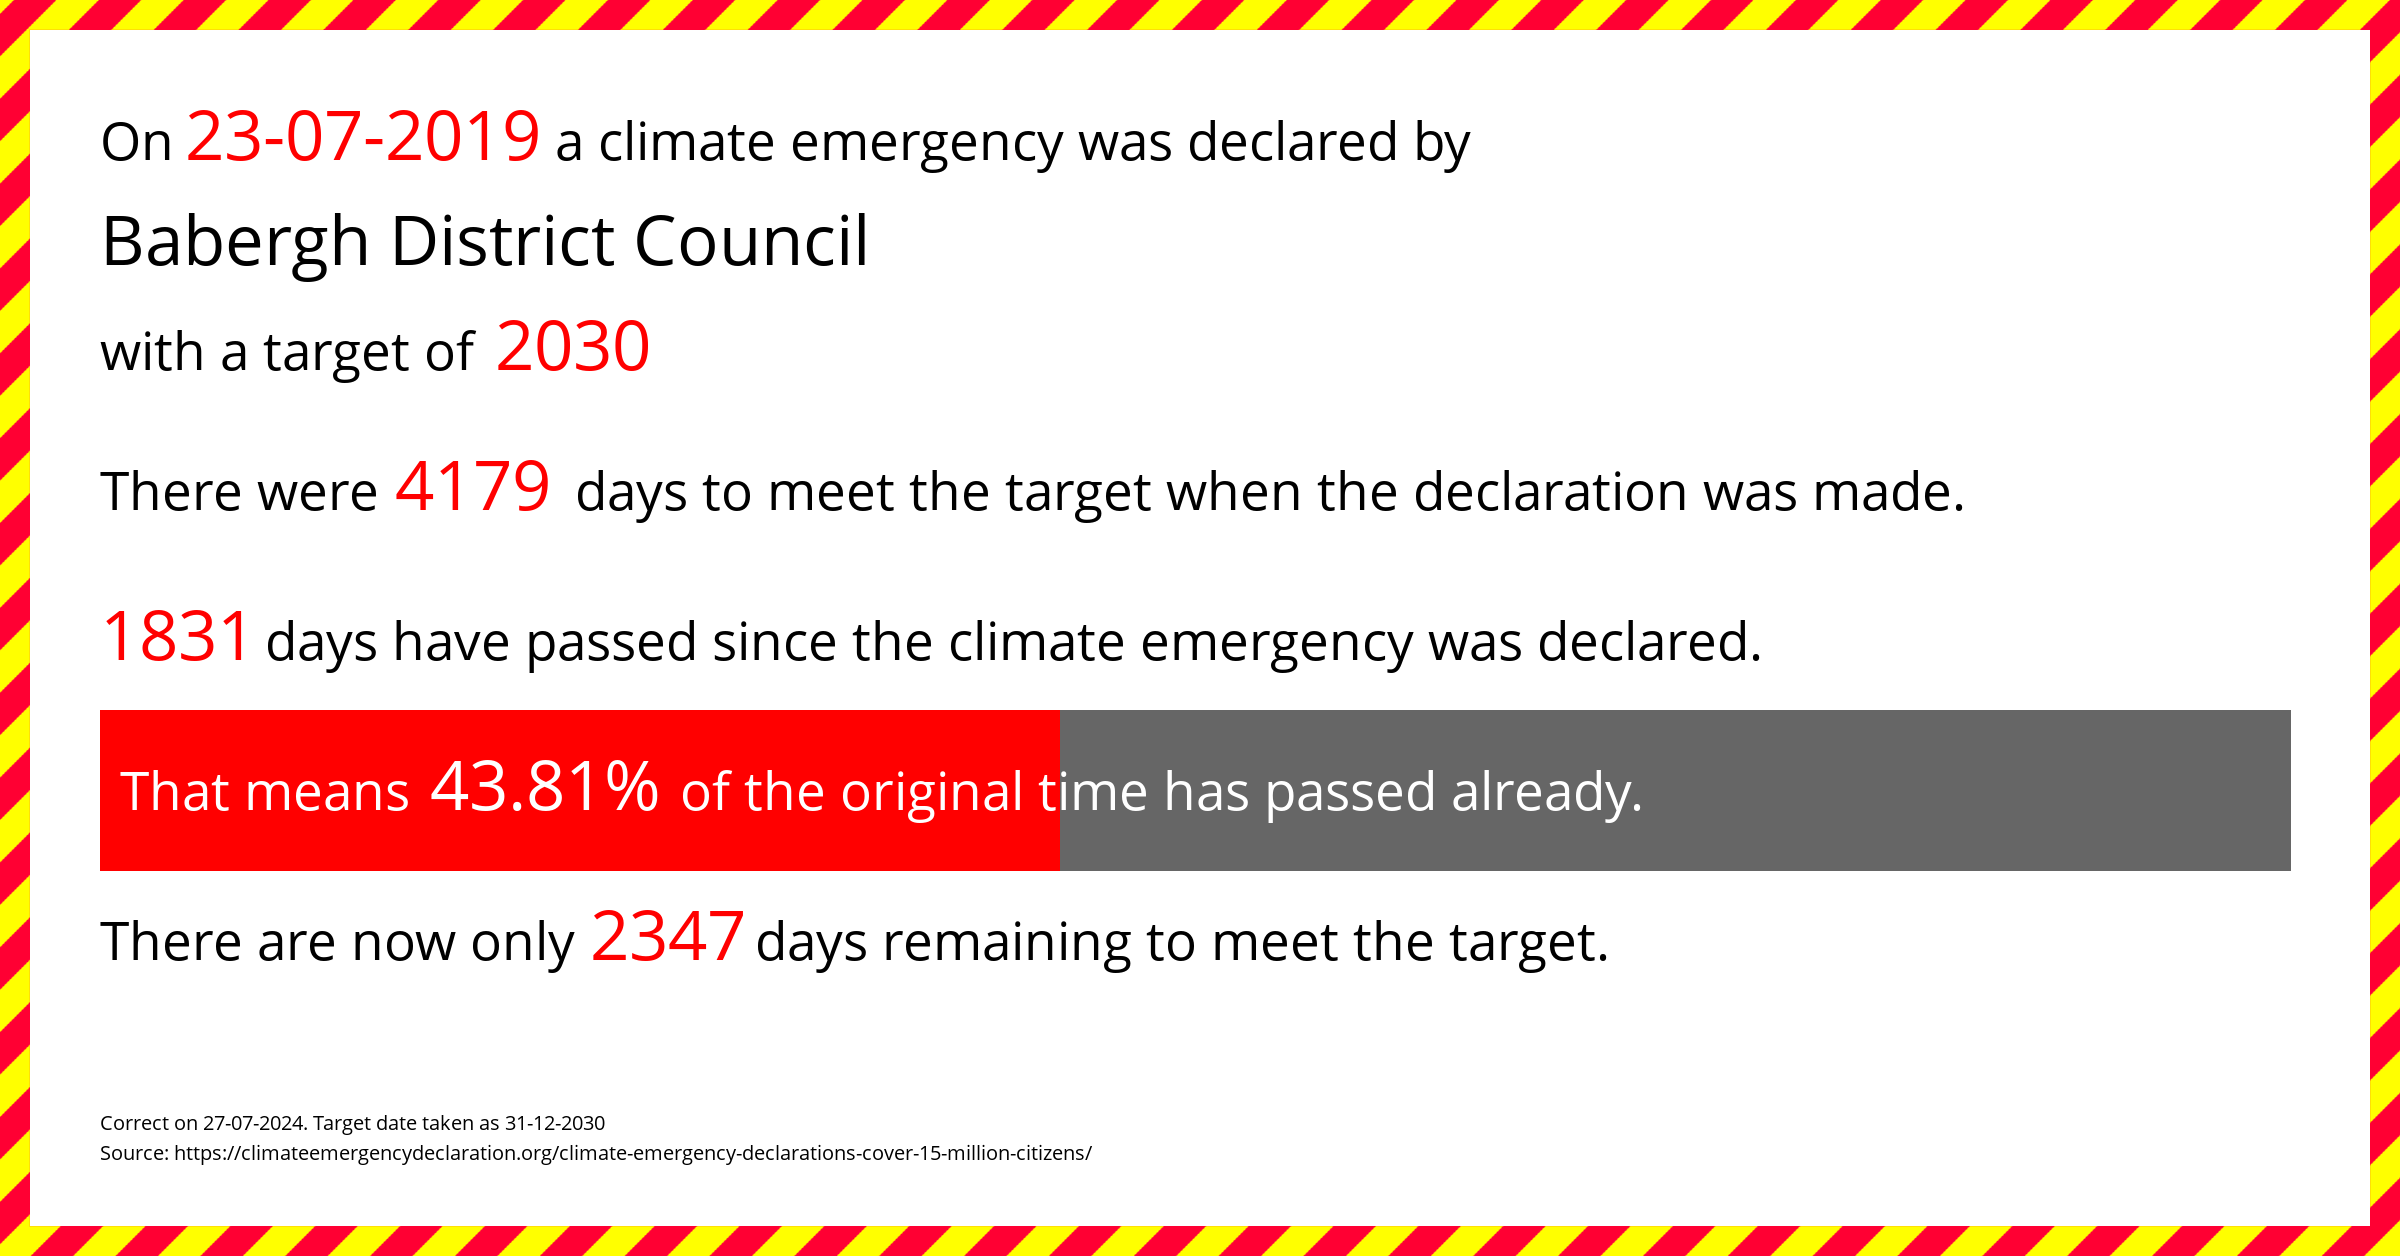 Babergh District Council declared a Climate emergency on Tuesday 23rd July 2019, with a target of 2030.